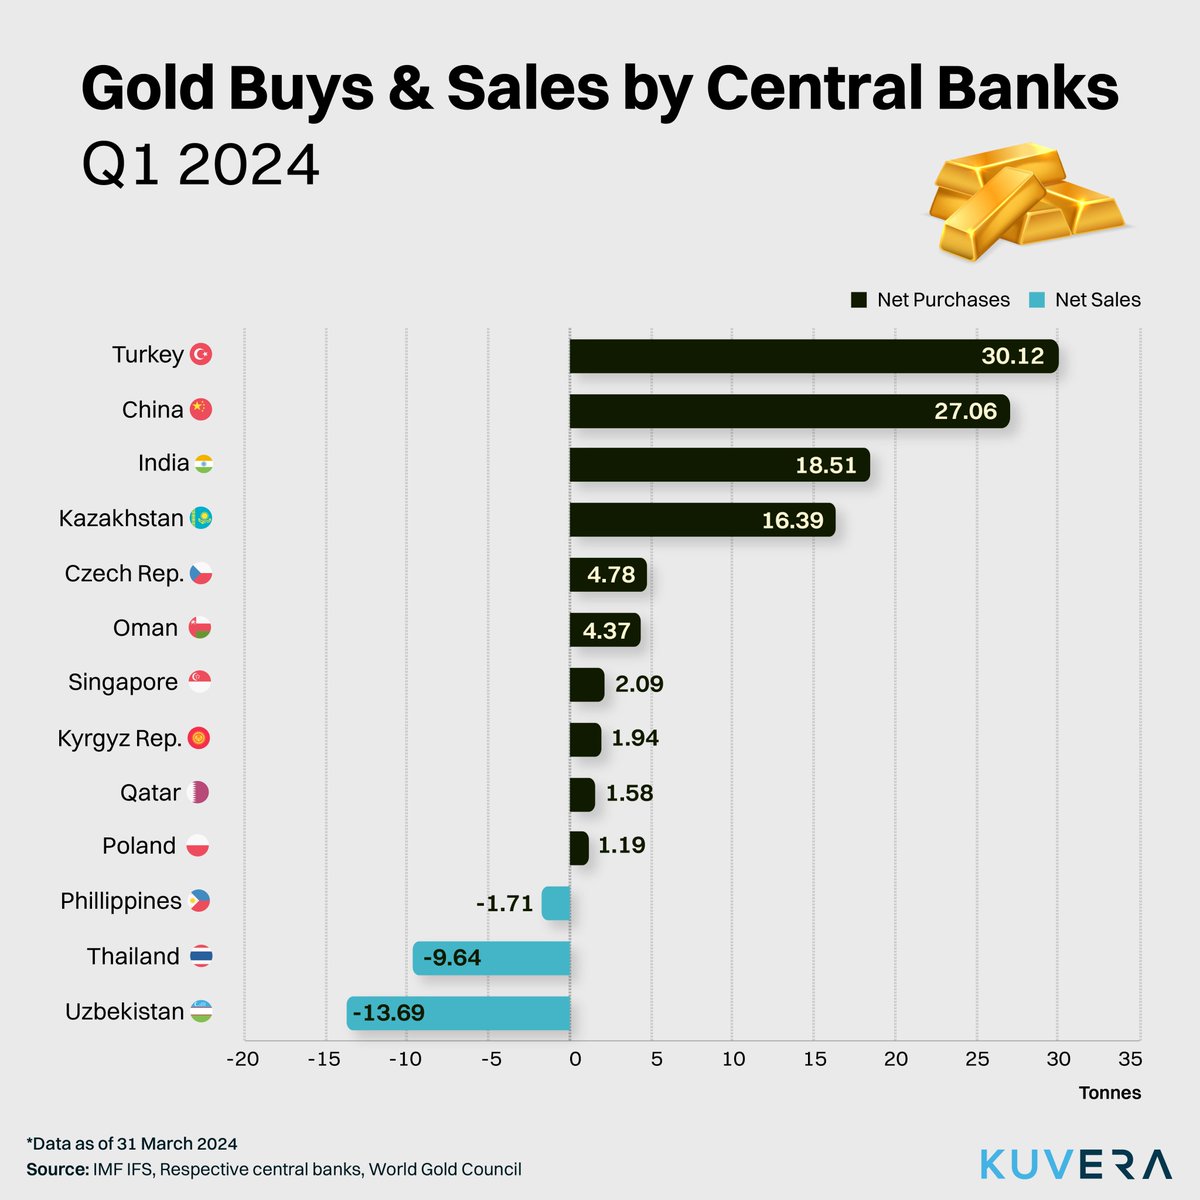 Central banks continue buying gold, despite fluctuations in market prices. RBI's net purchases in gold amounts to 18.51 tonnes in the first quarter of 2024.
#ChartOfTheDay